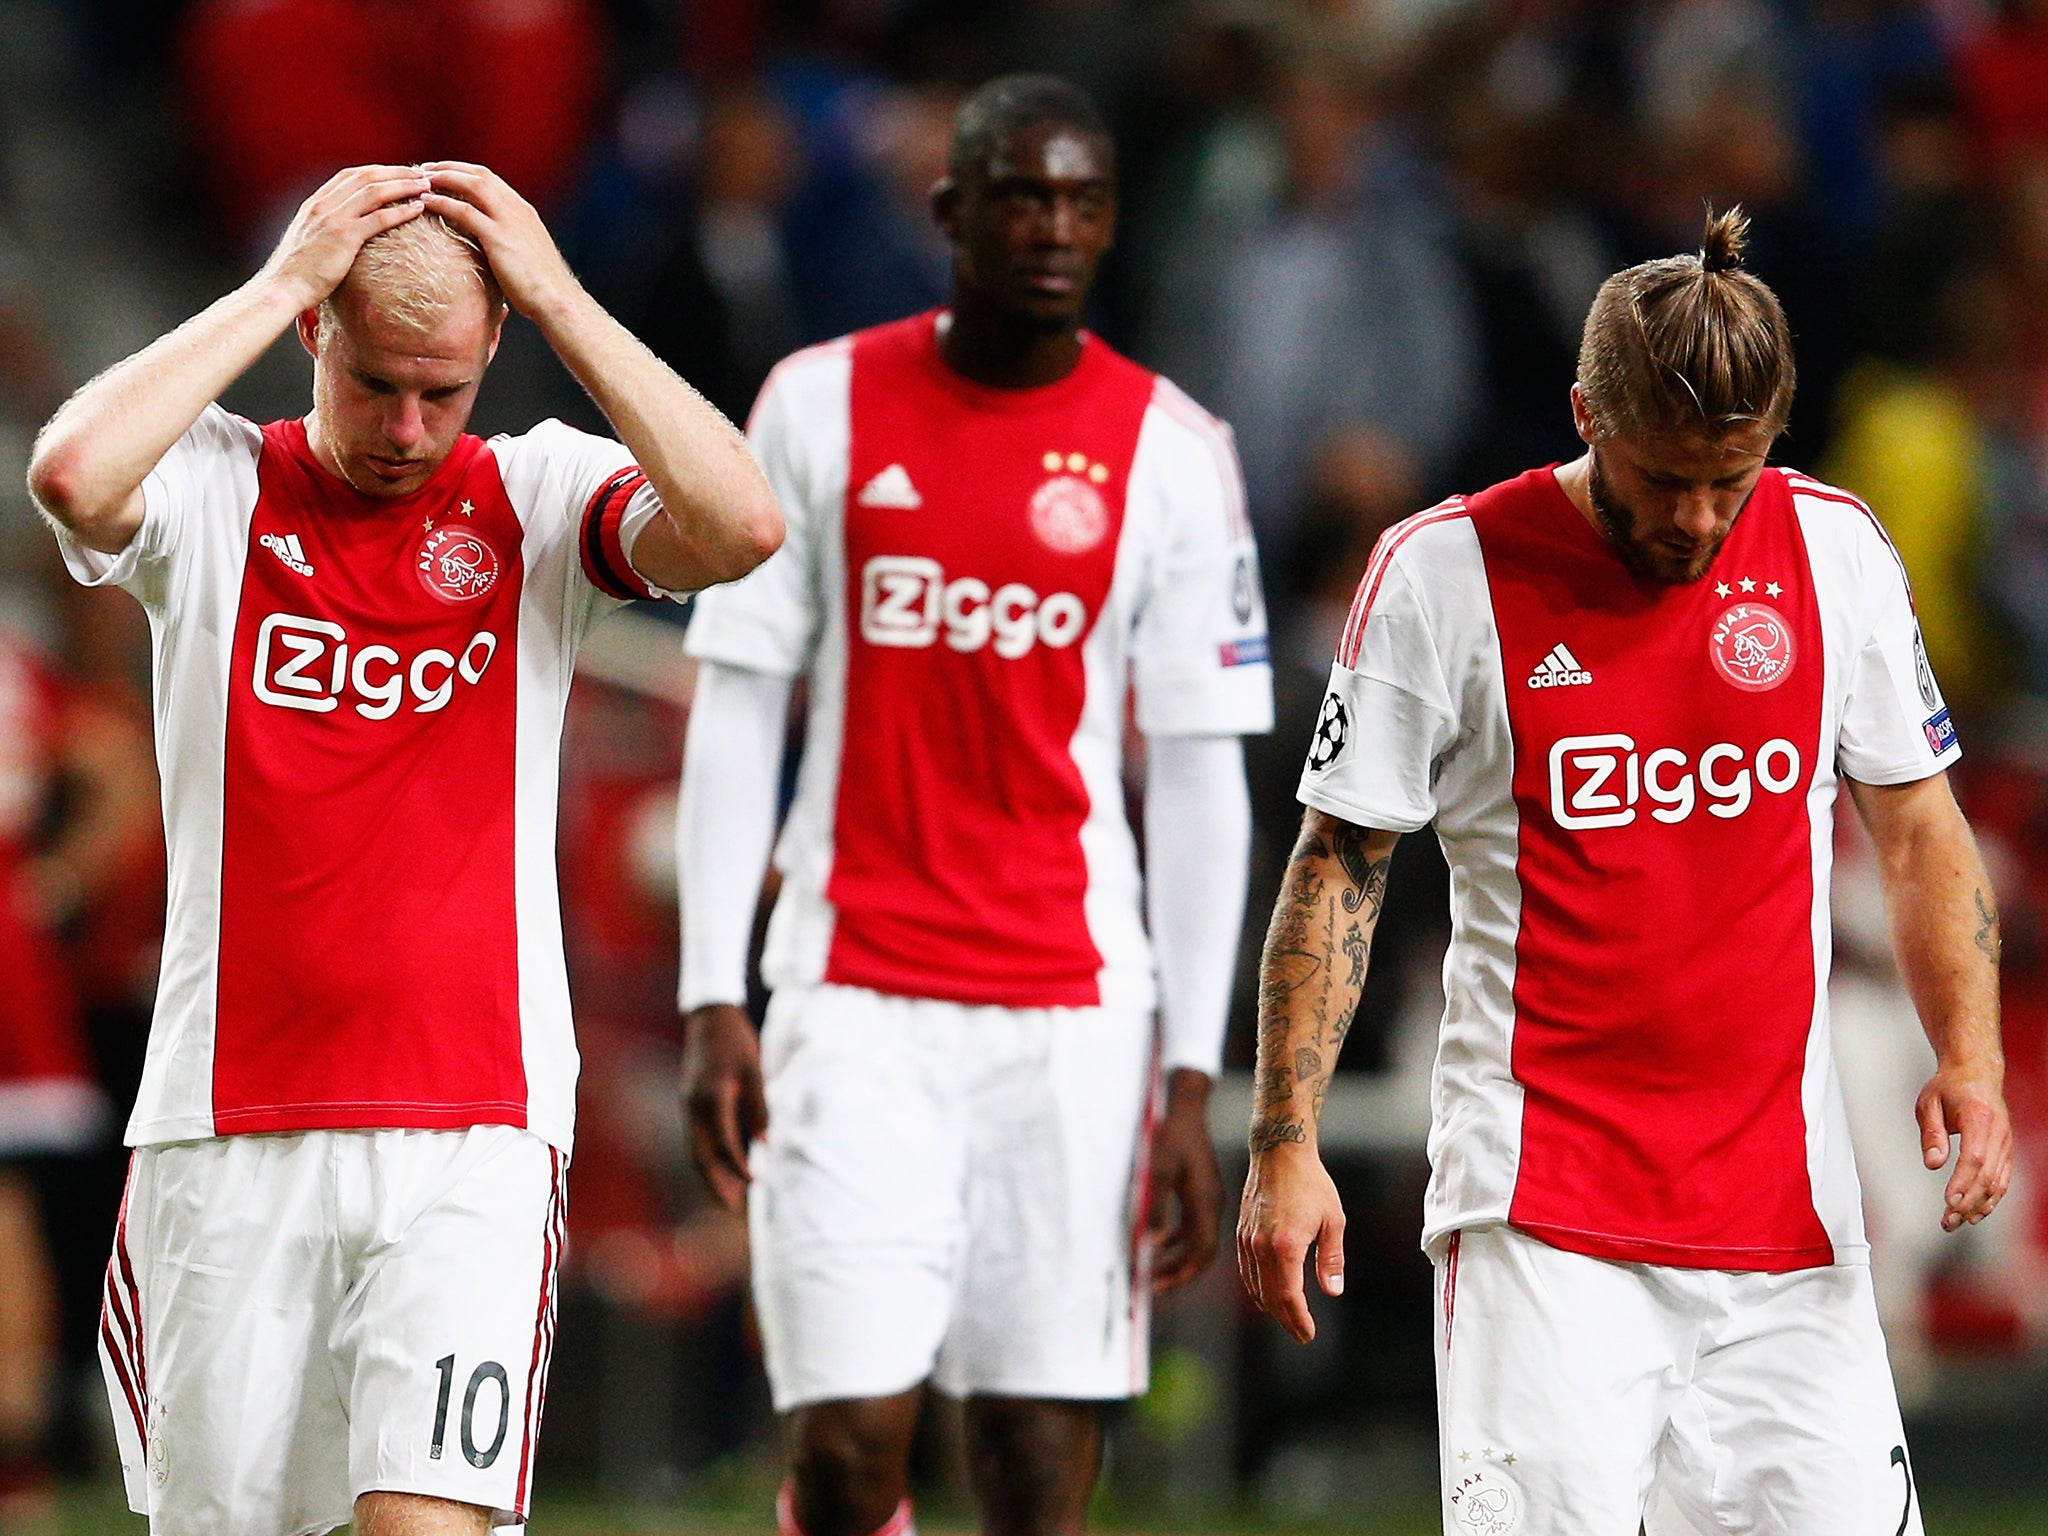 &#13;
Ajax players react after being dumped out of the Champions League at the qualifying phase earlier this season&#13;